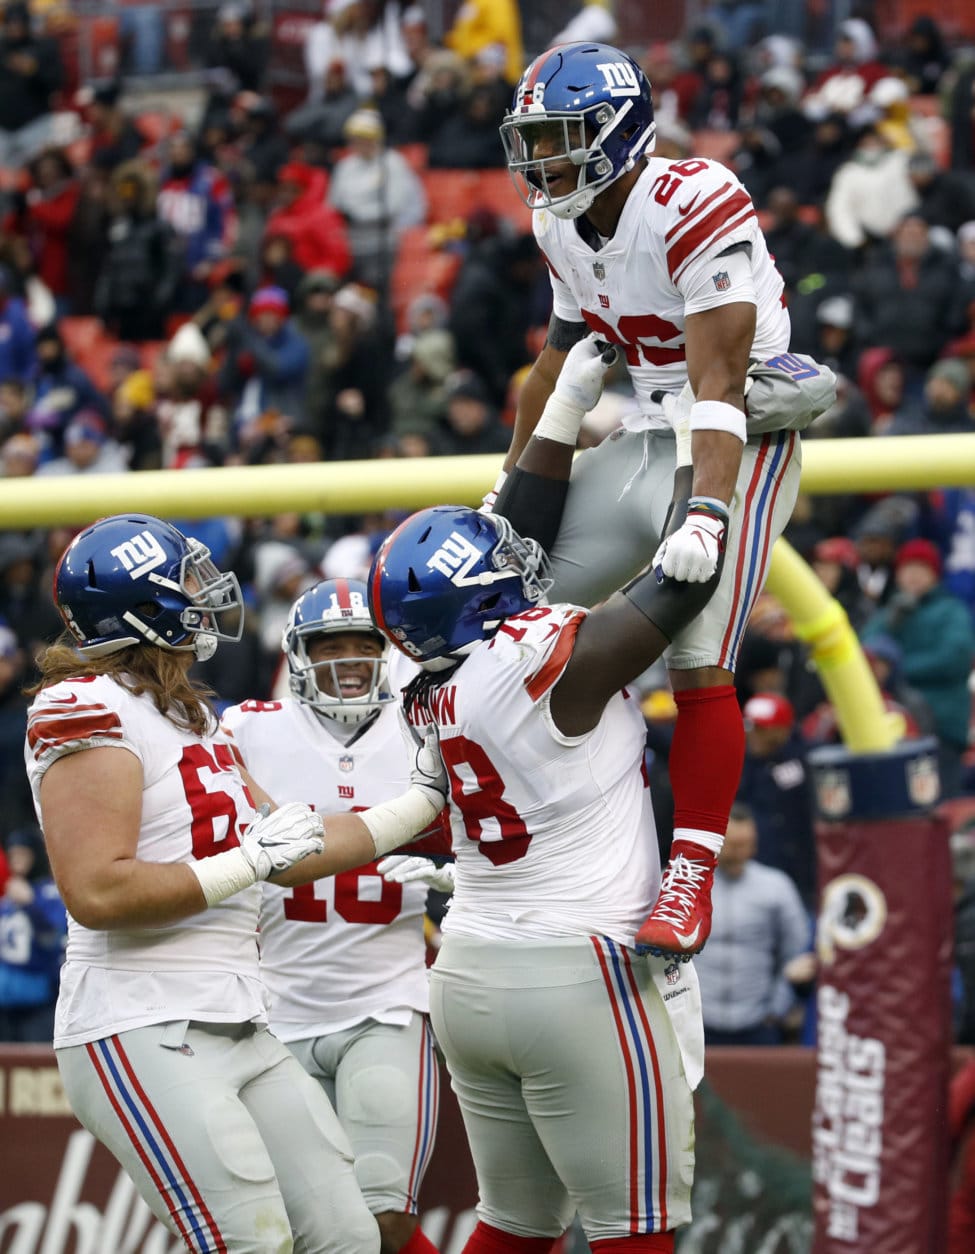 New York Giants running back Saquon Barkley (26) is picked up offensive guard Jamon Brown (78) as they celebrate his 78-yard touchdown during the first half of an NFL football game against the Washington Redskins, Sunday, Dec. 9, 2018, in Landover, Md. (AP Photo/Patrick Semansky)